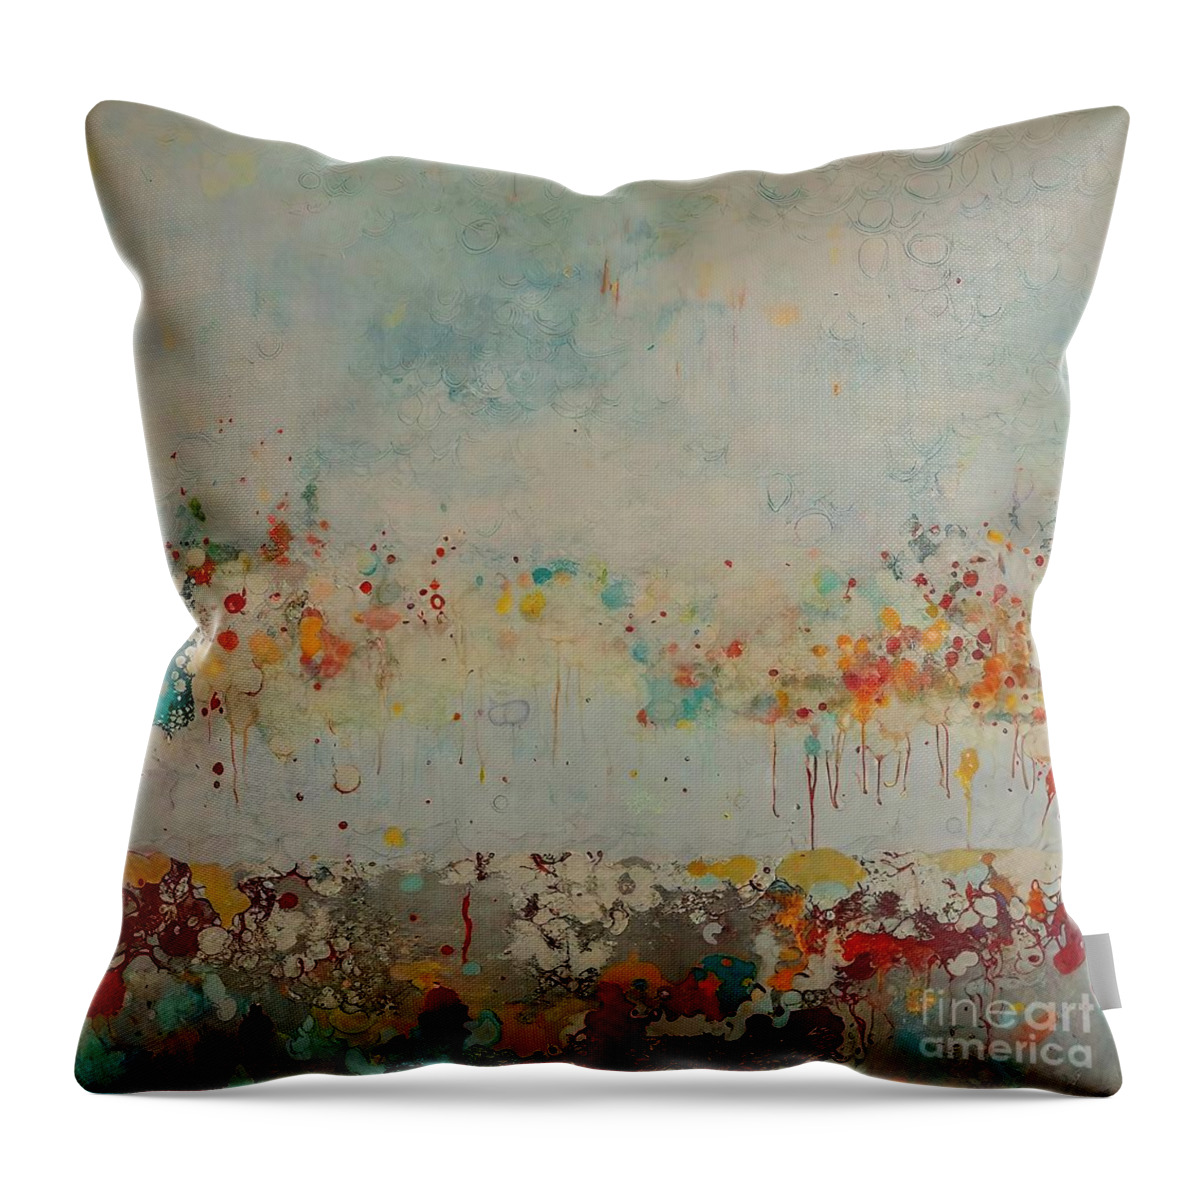 Texture Throw Pillow featuring the painting Texture Wall Grunge Paint Abstract Art Painting #2 by N Akkash